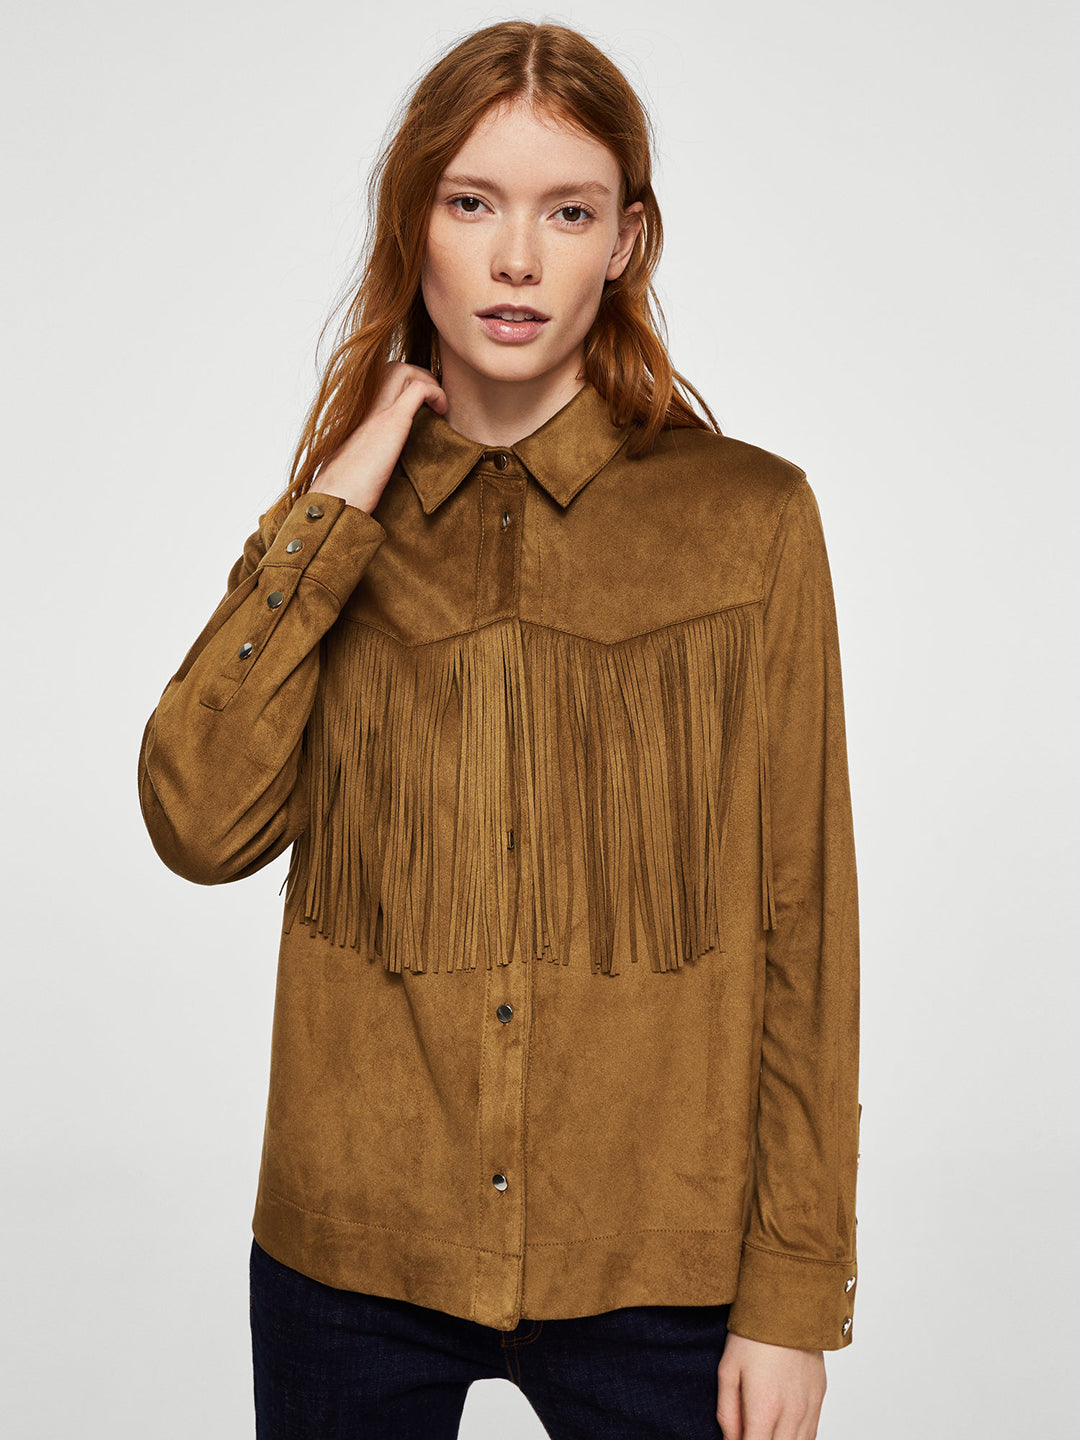 Brown Fringed Solid Casual Shirt